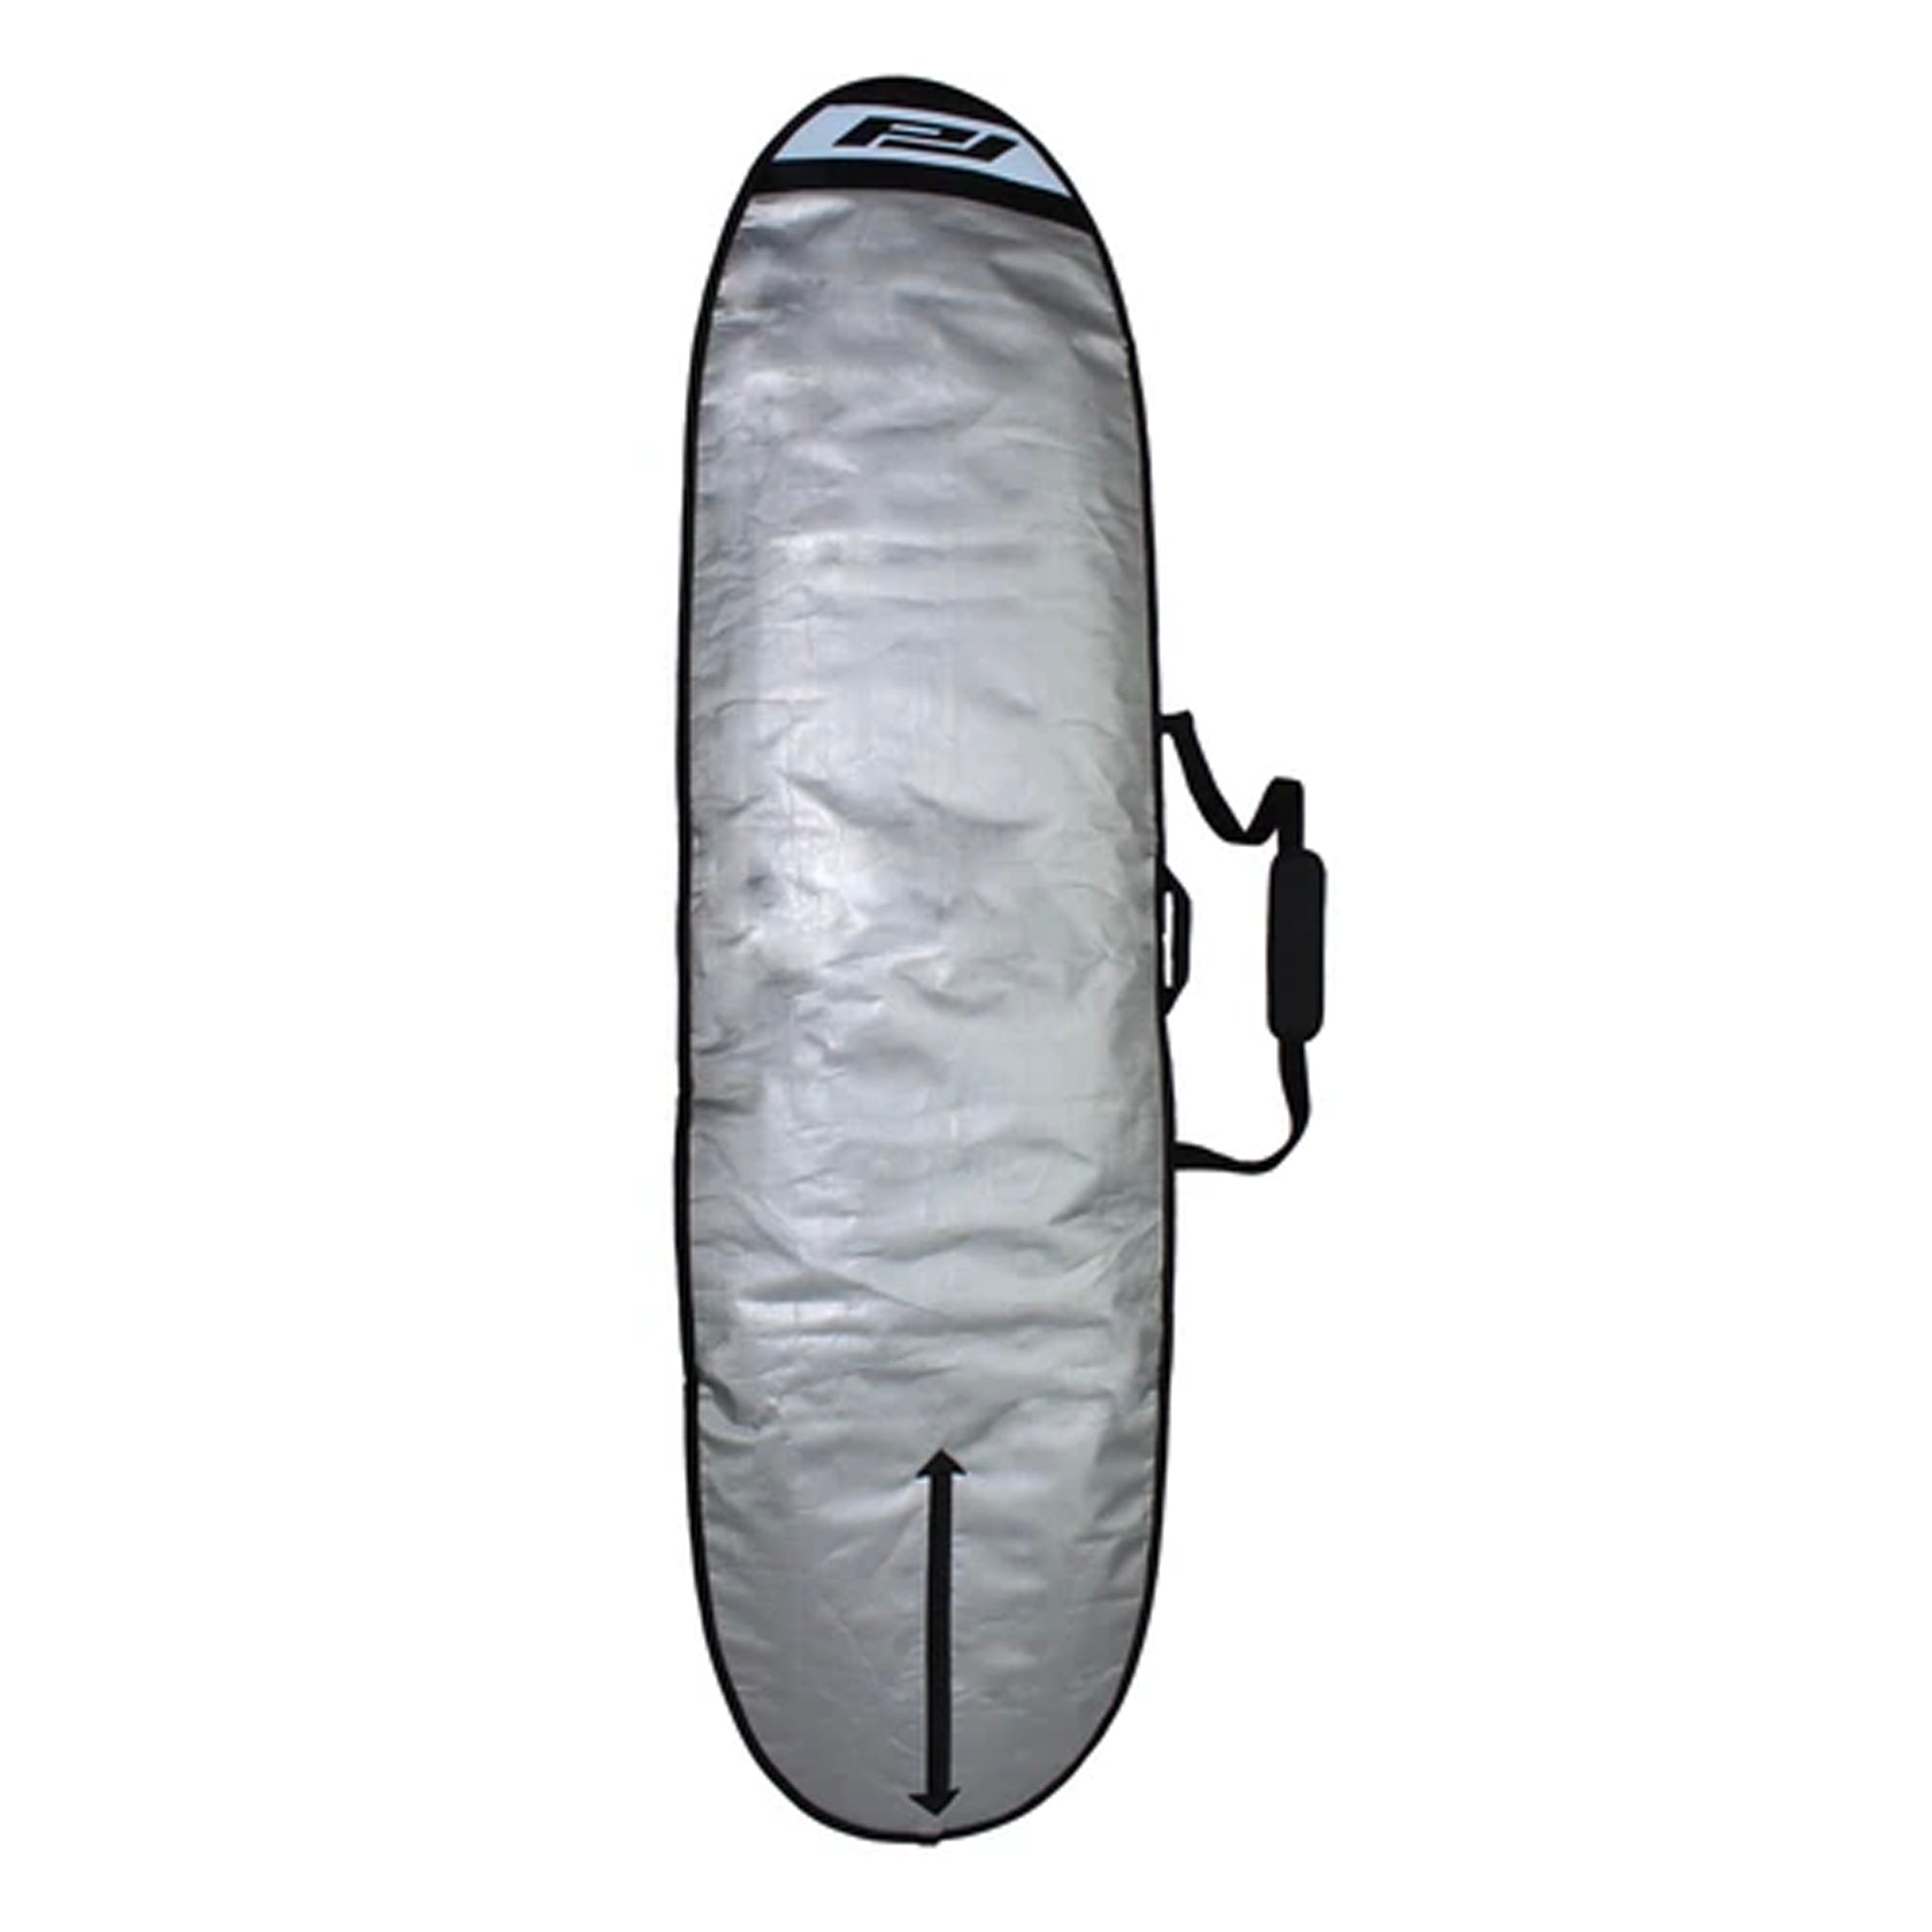 Pro-Lite Resession Day Surfboard Bag - Longboard